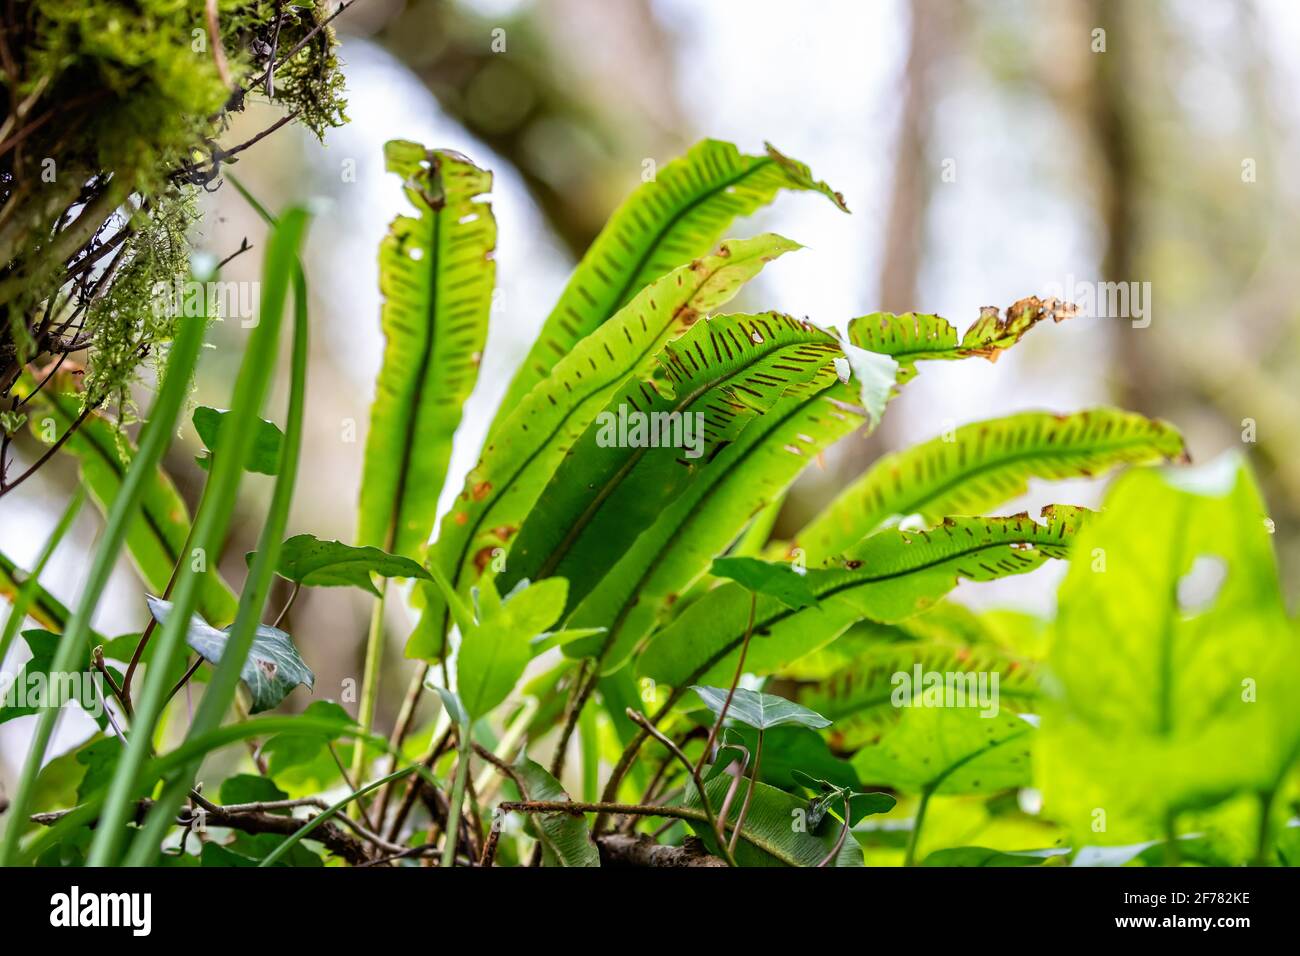 Close up of clump of Hart's Tongue ferns with orange striped spores on underside Stock Photo